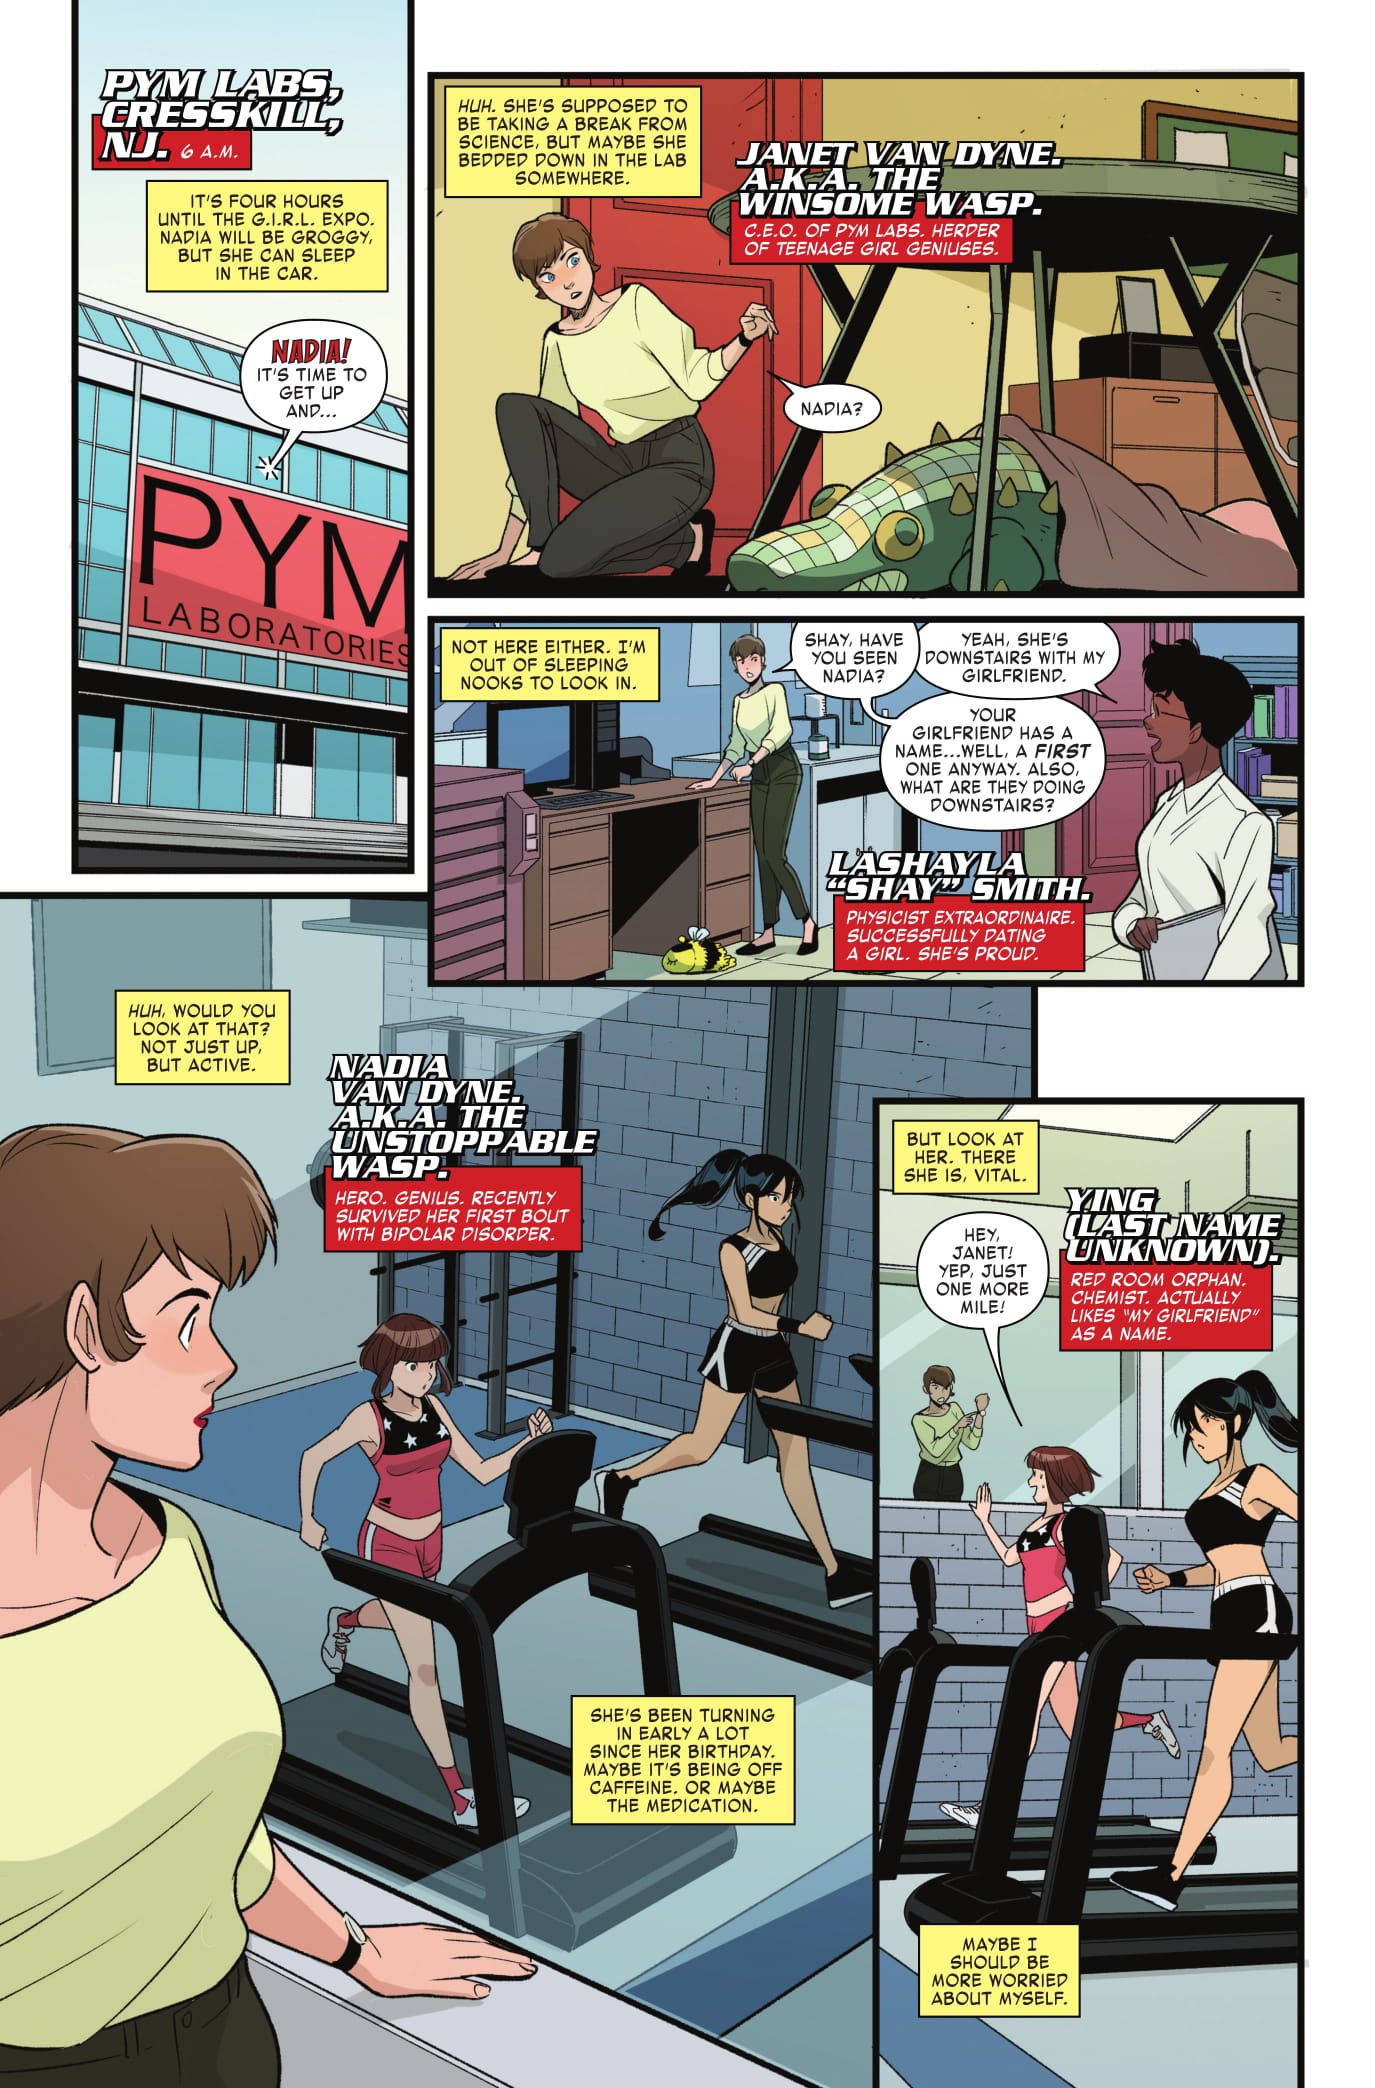 Unstoppable Wasp #8 preview page 1